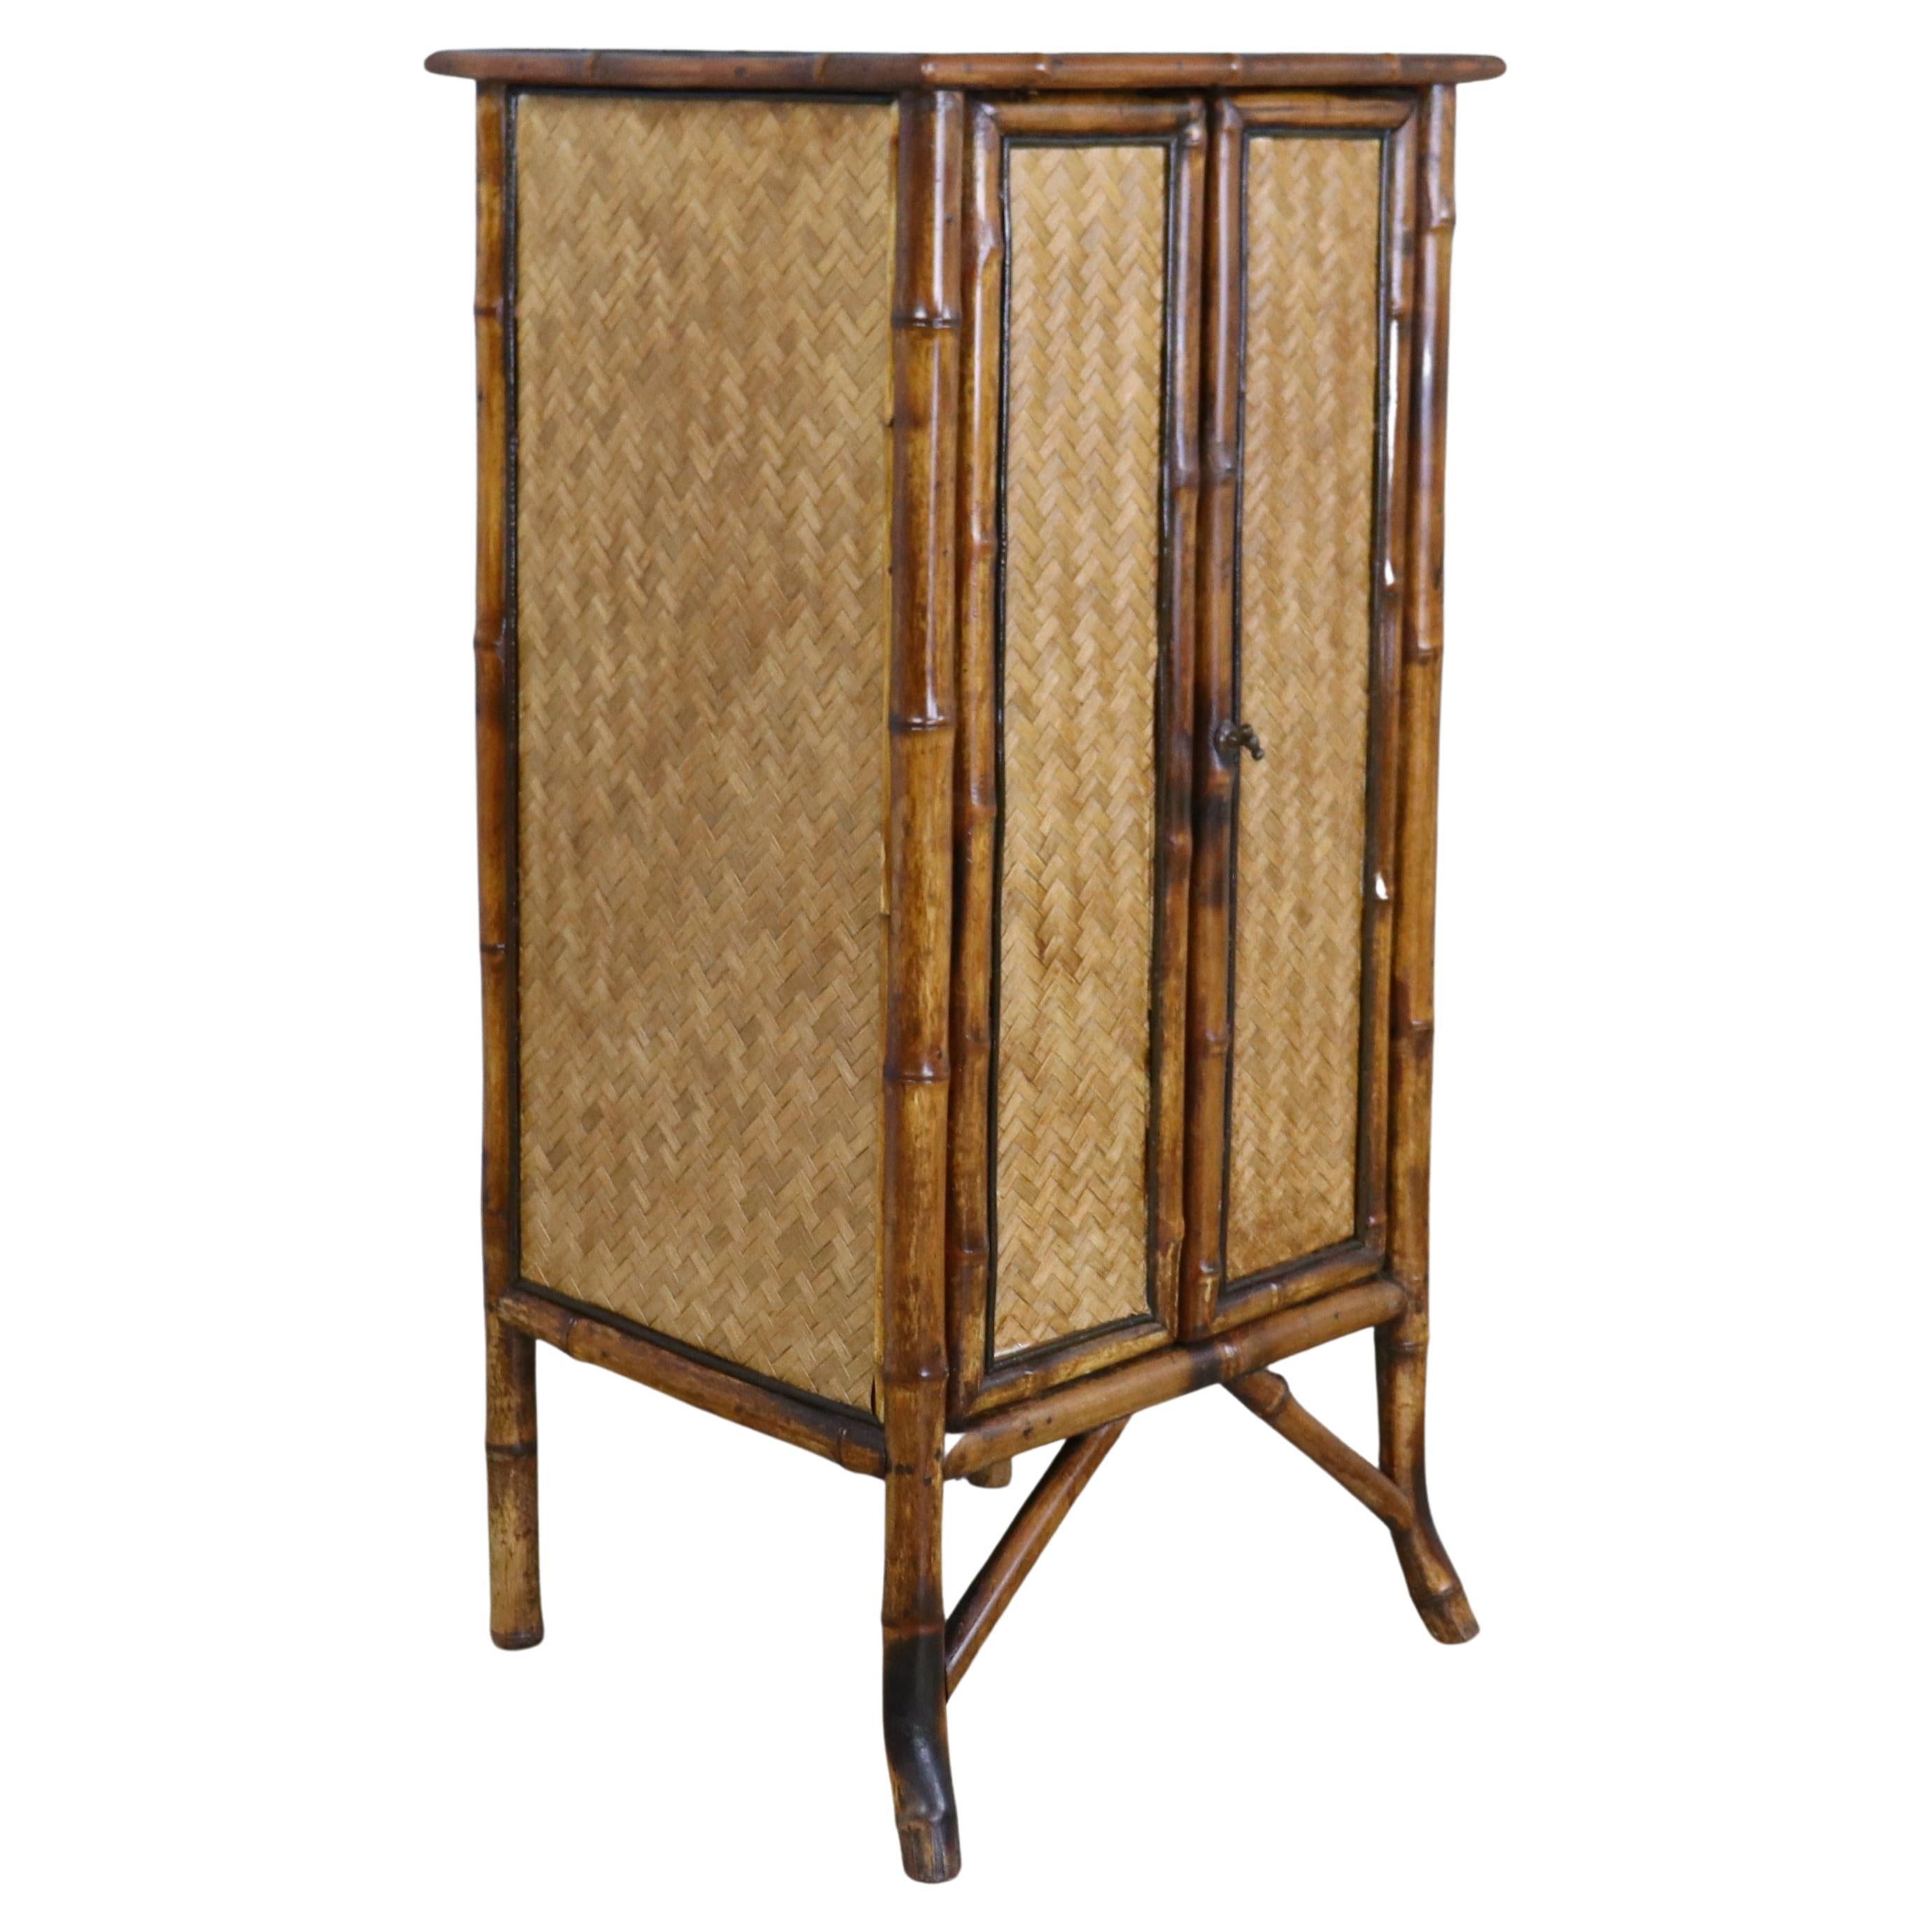 Antique English Bamboo Cabinet